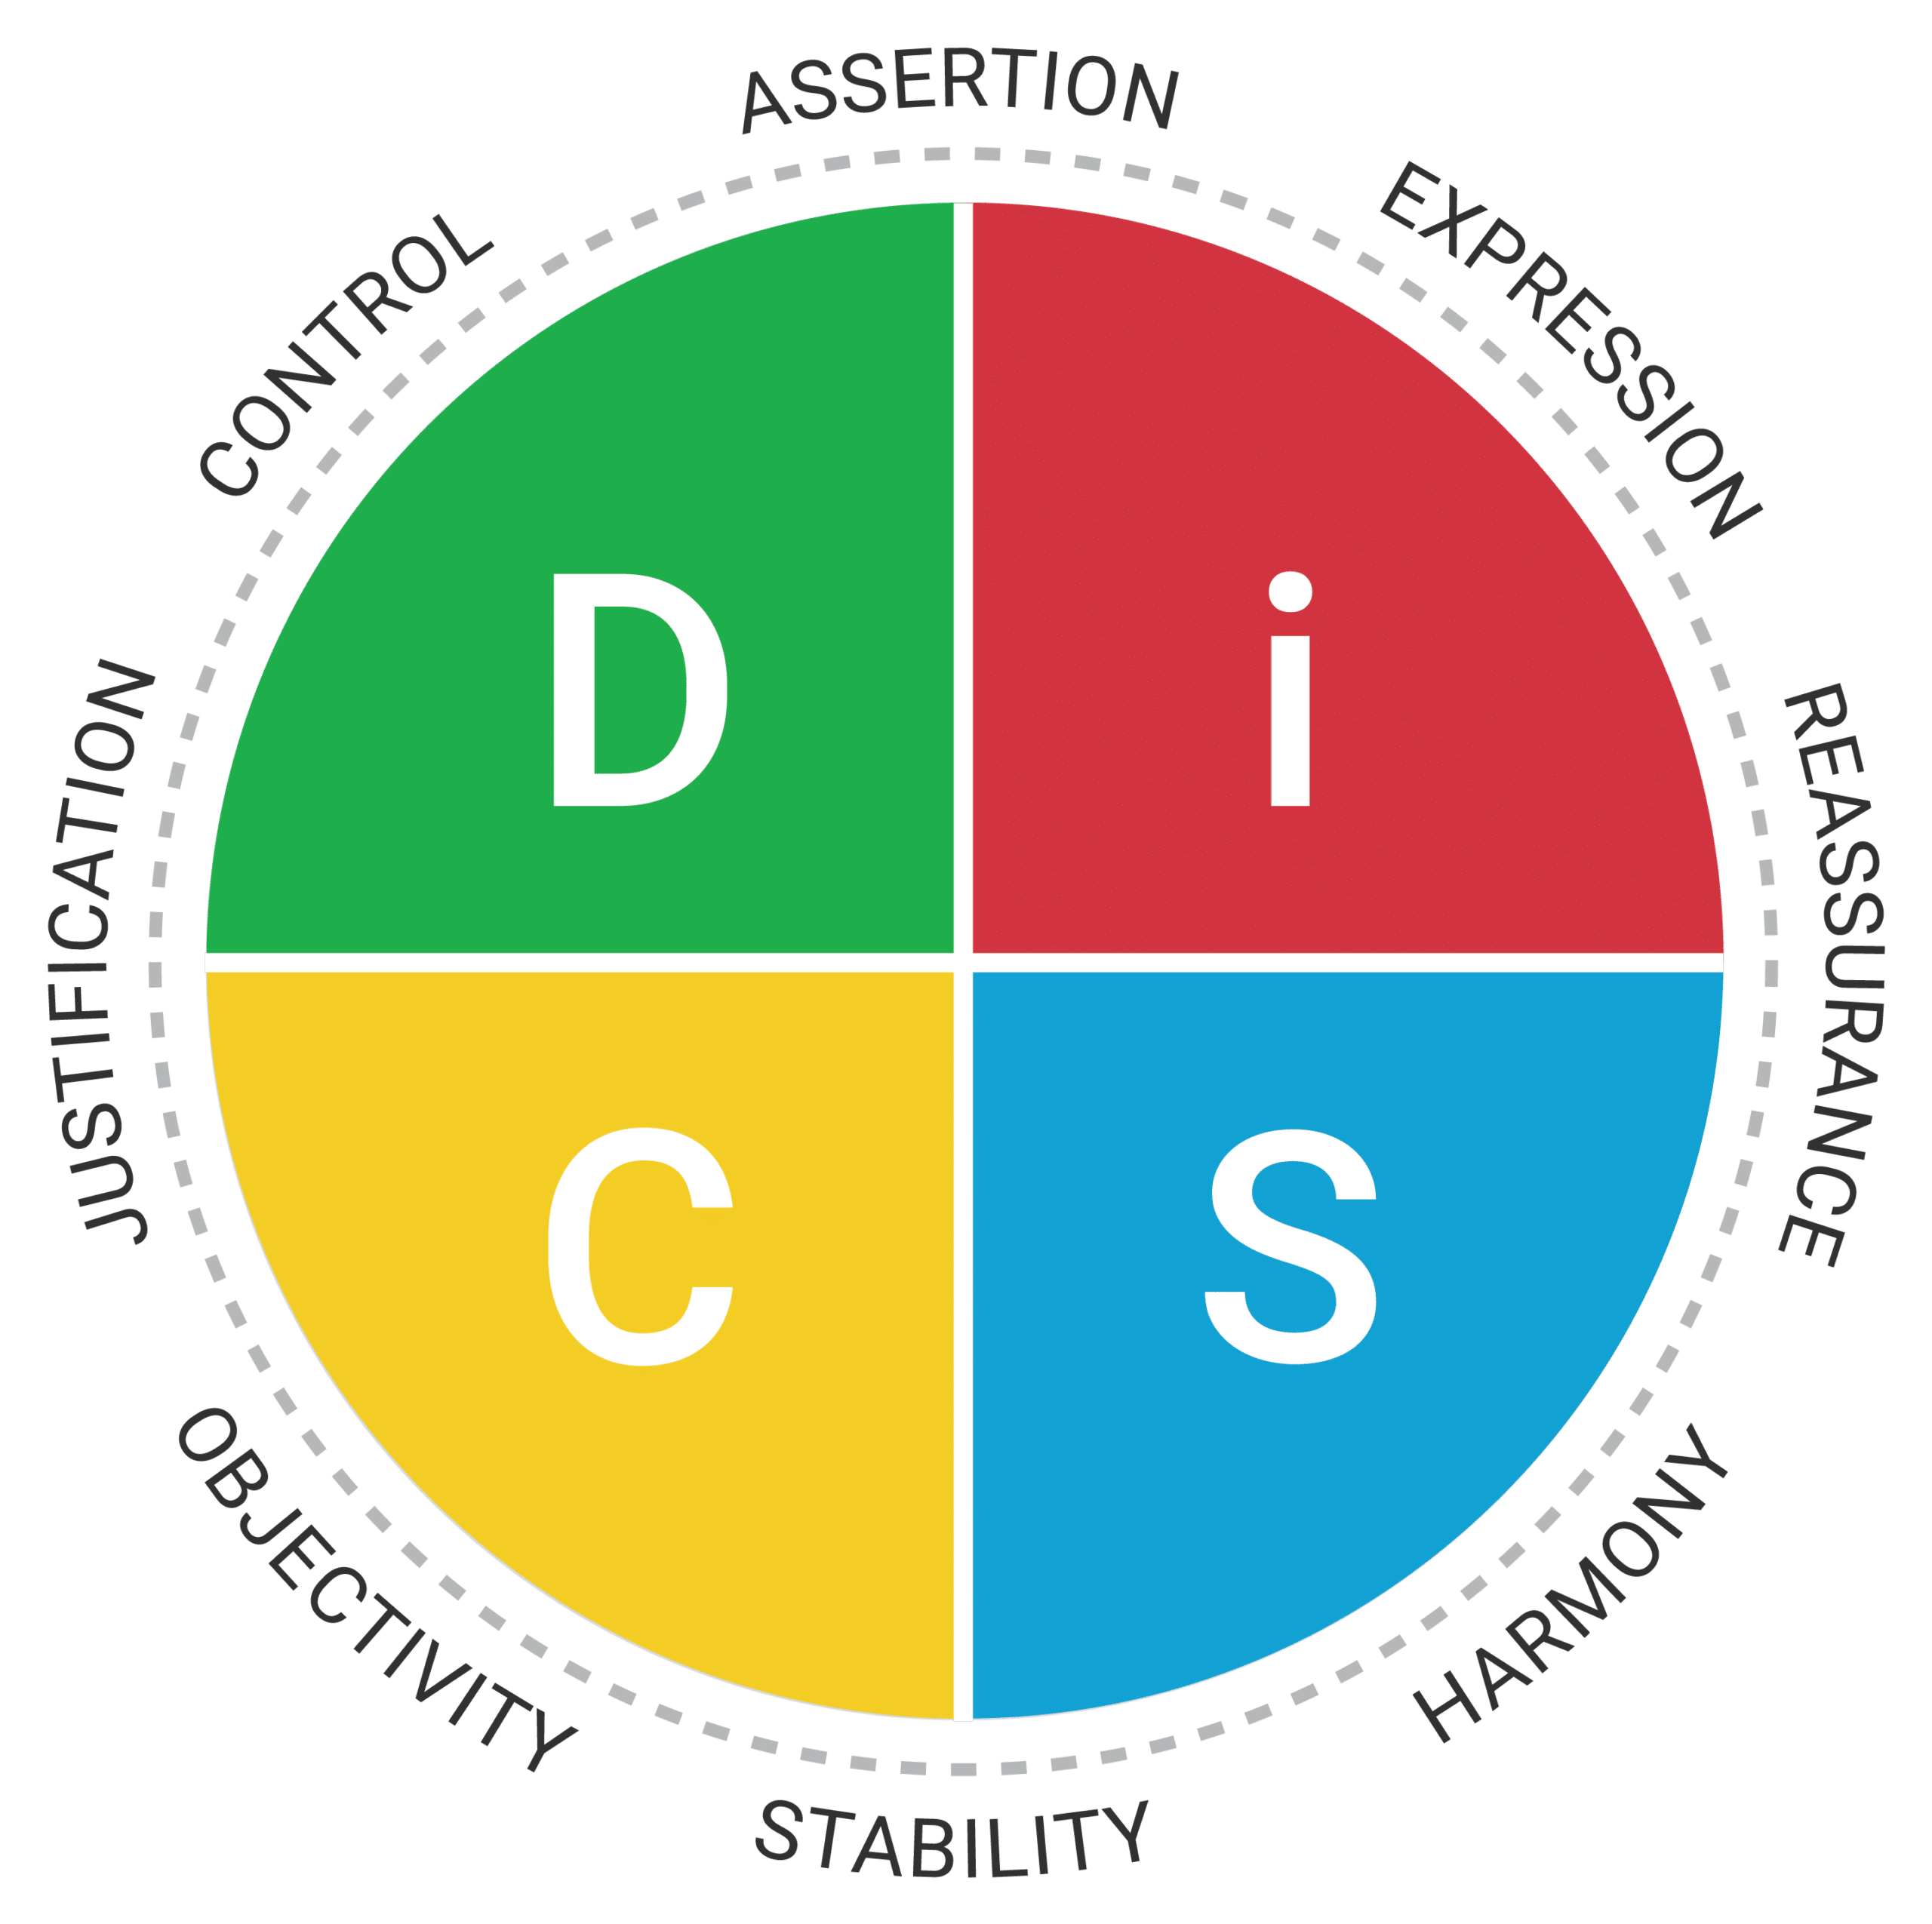 Priorities map from Everything DiSC Productive Conflict